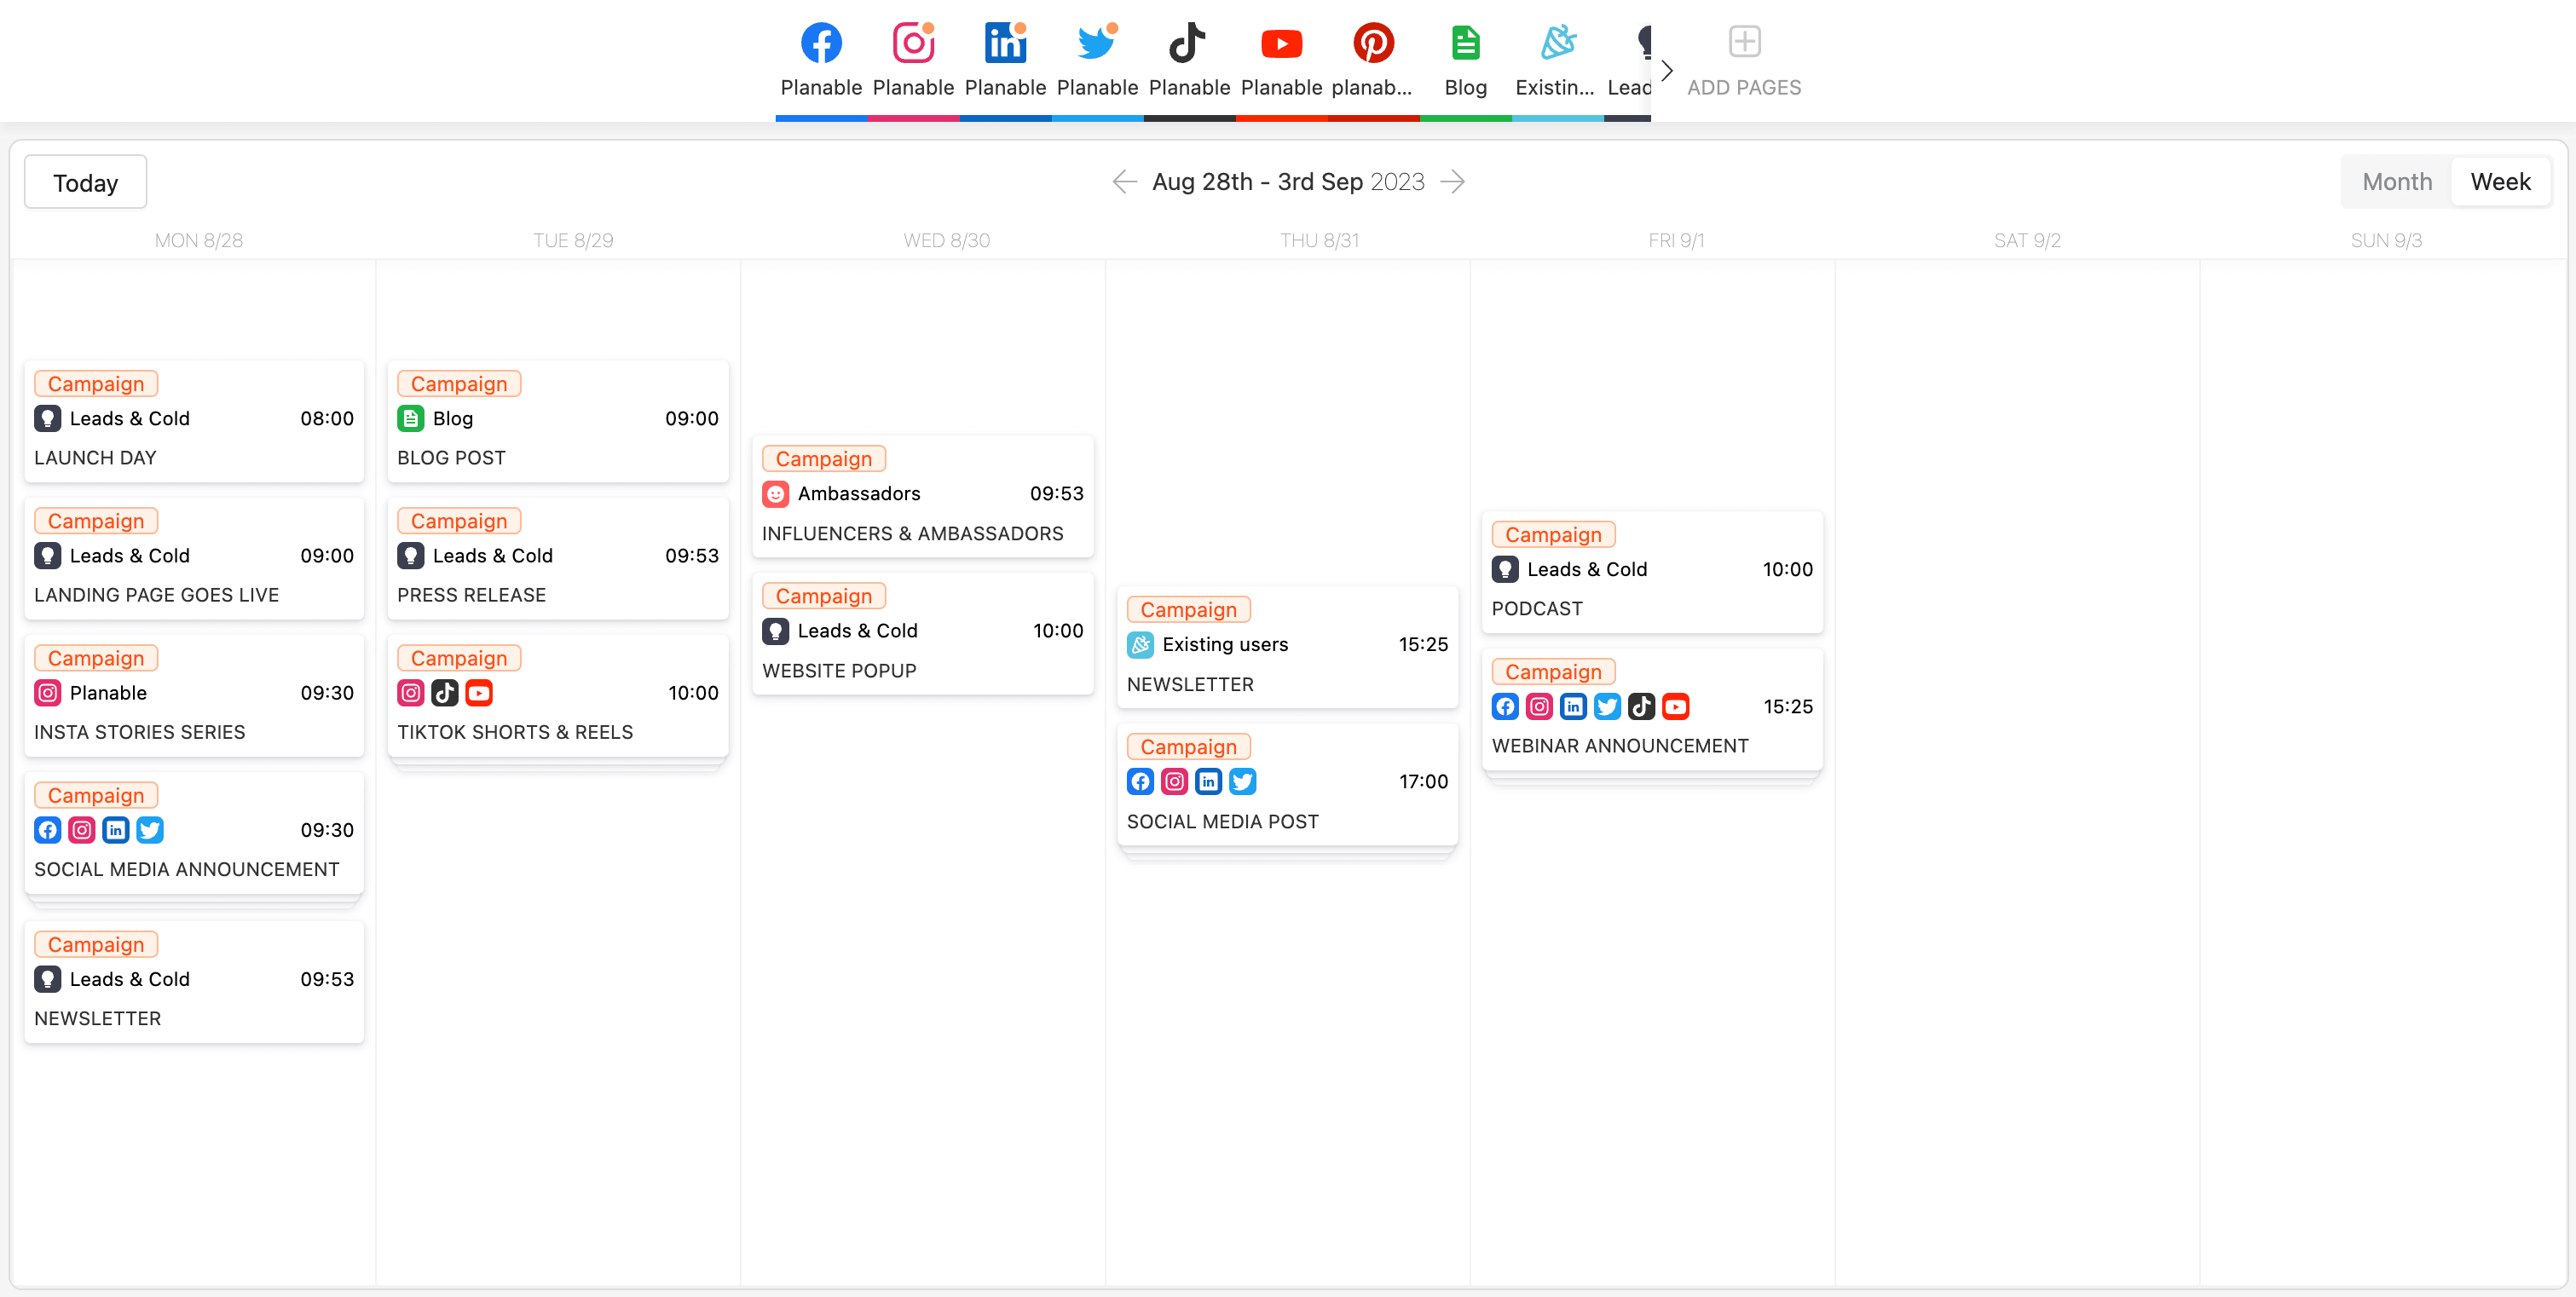 Campaign calendar template in Planable for different social media platforms, blogs and types of campaign